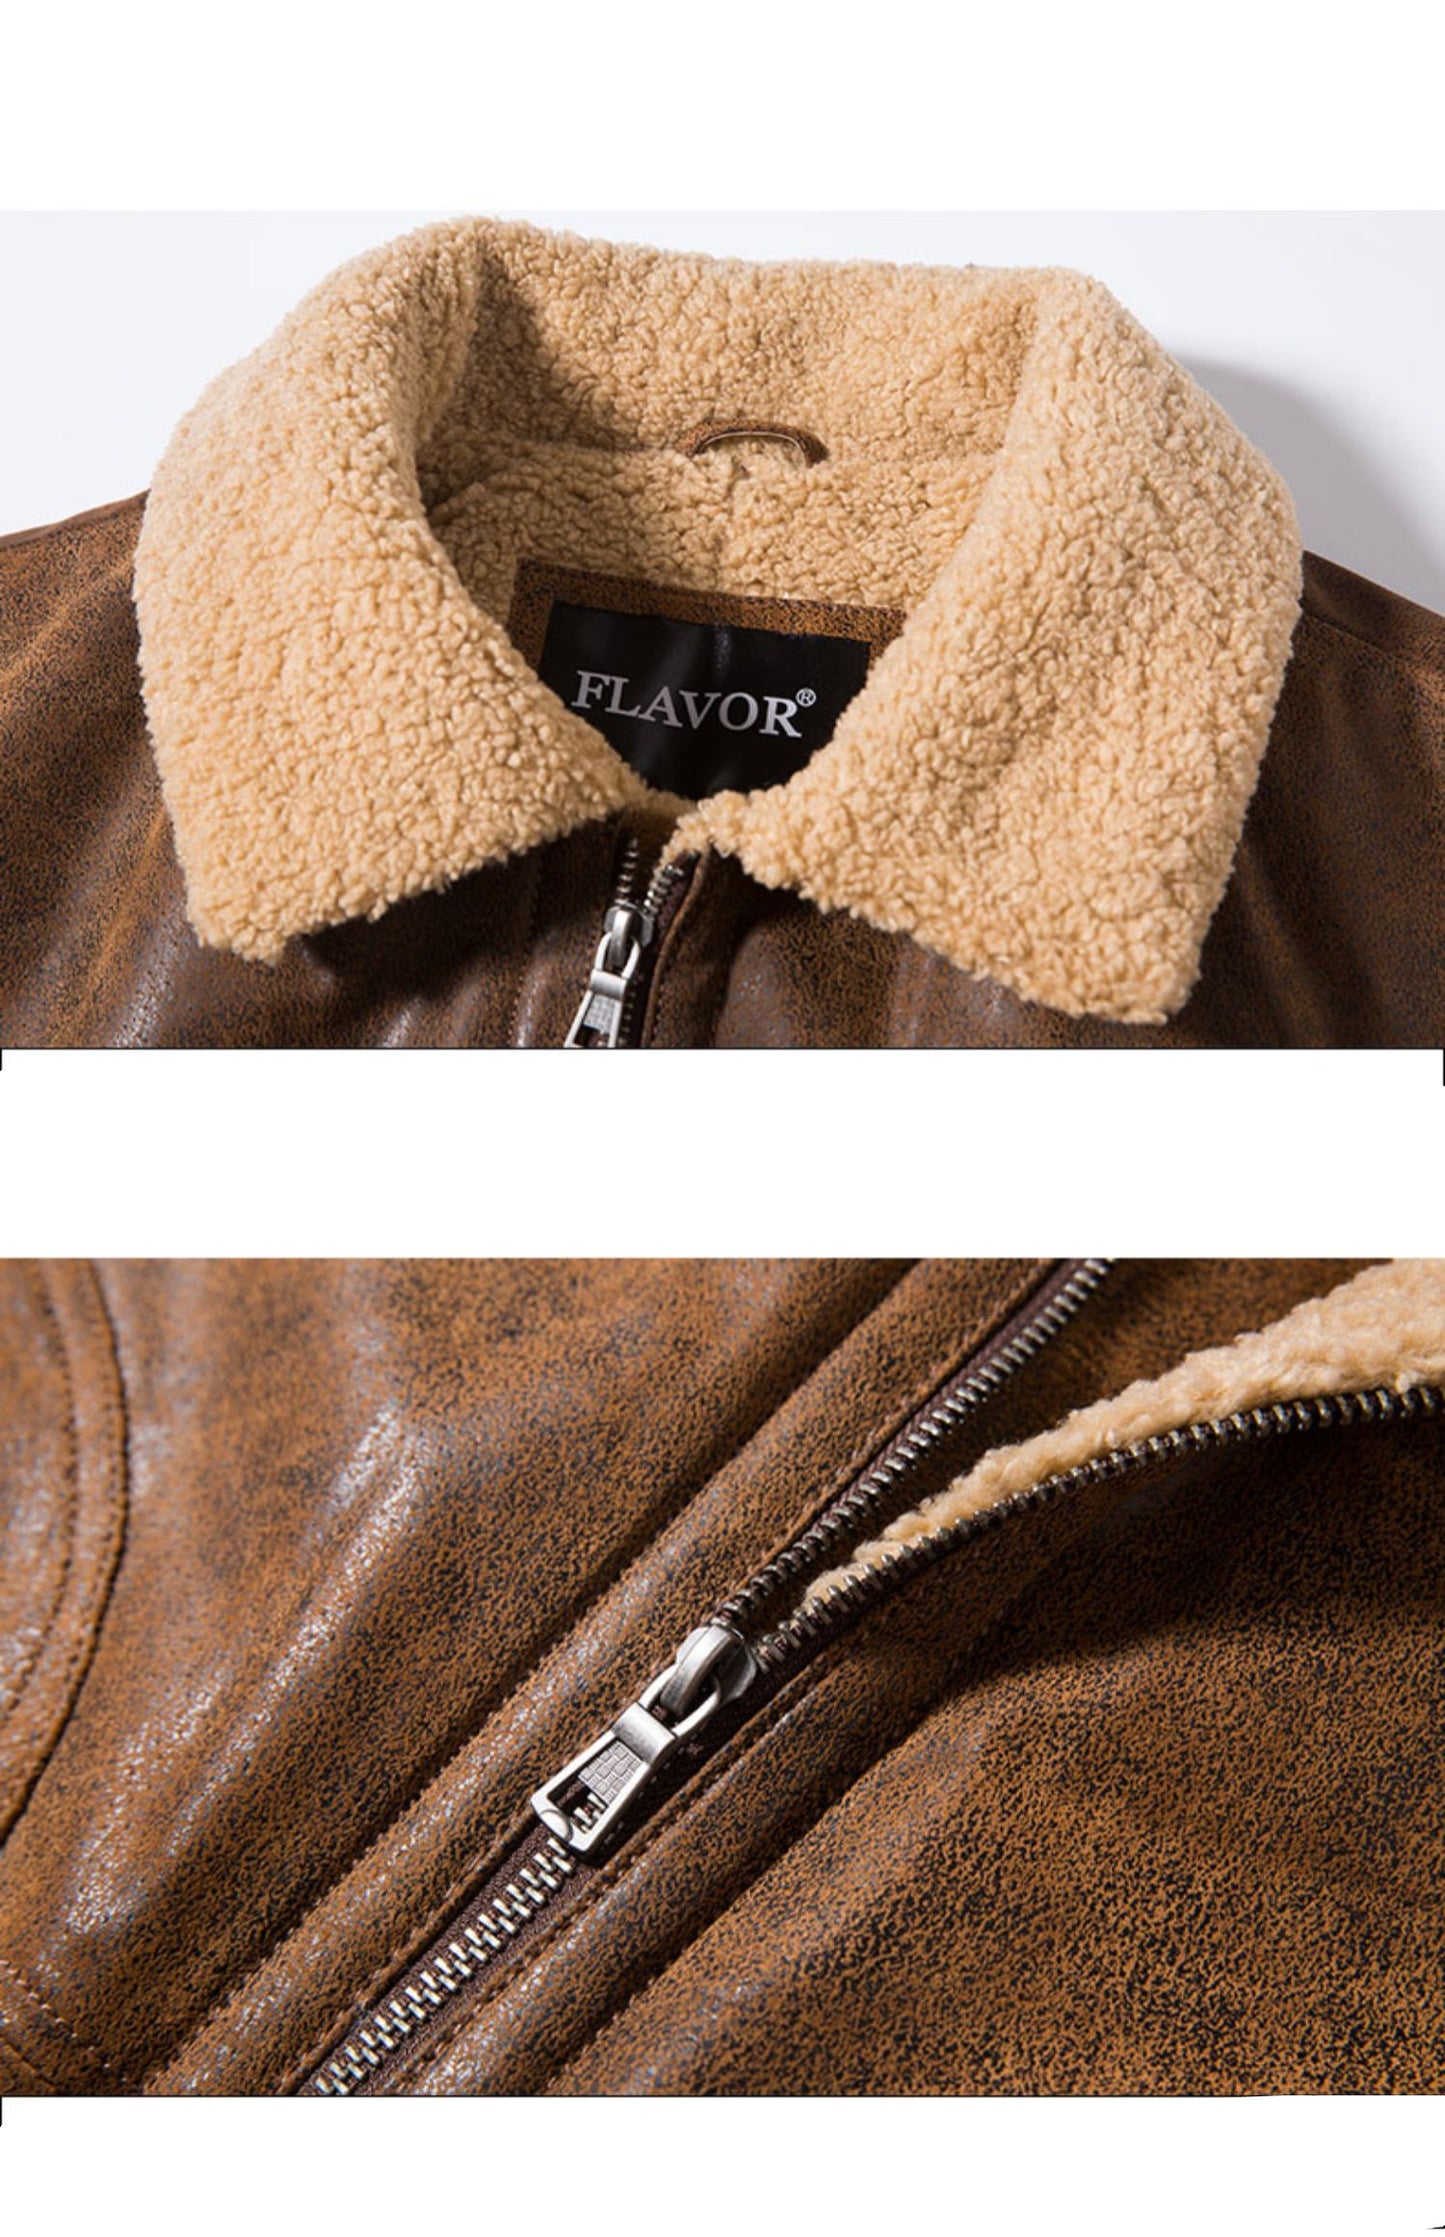 Vintage Casual American Leather Jacket - Timeless Style and Comfort | Lootario - Lootario